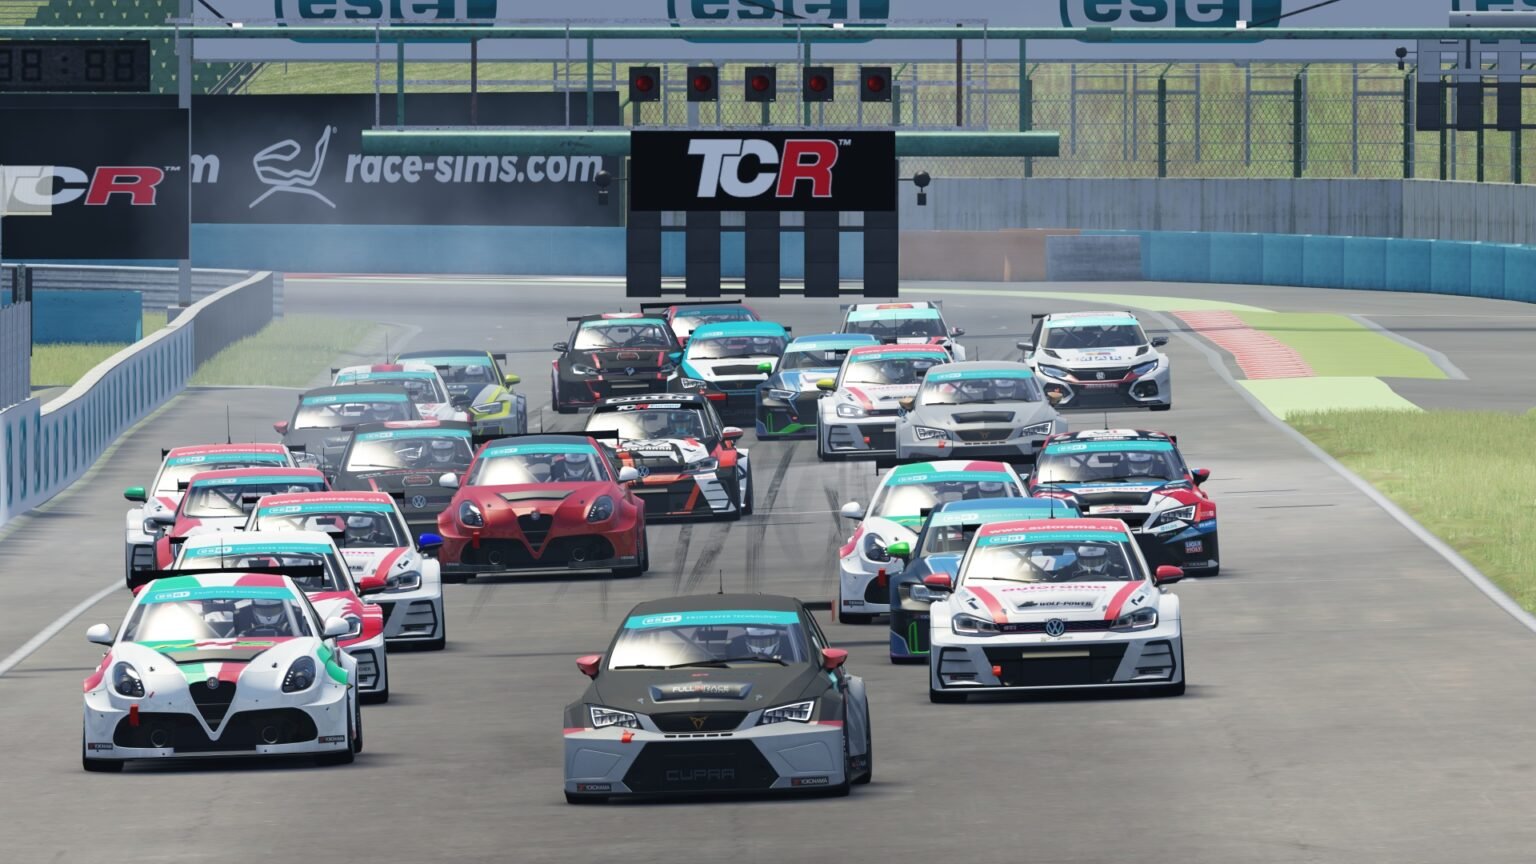 More information about "TCR Eastern Europe Simracing: stasera ore 21 il gran finale a Brno"